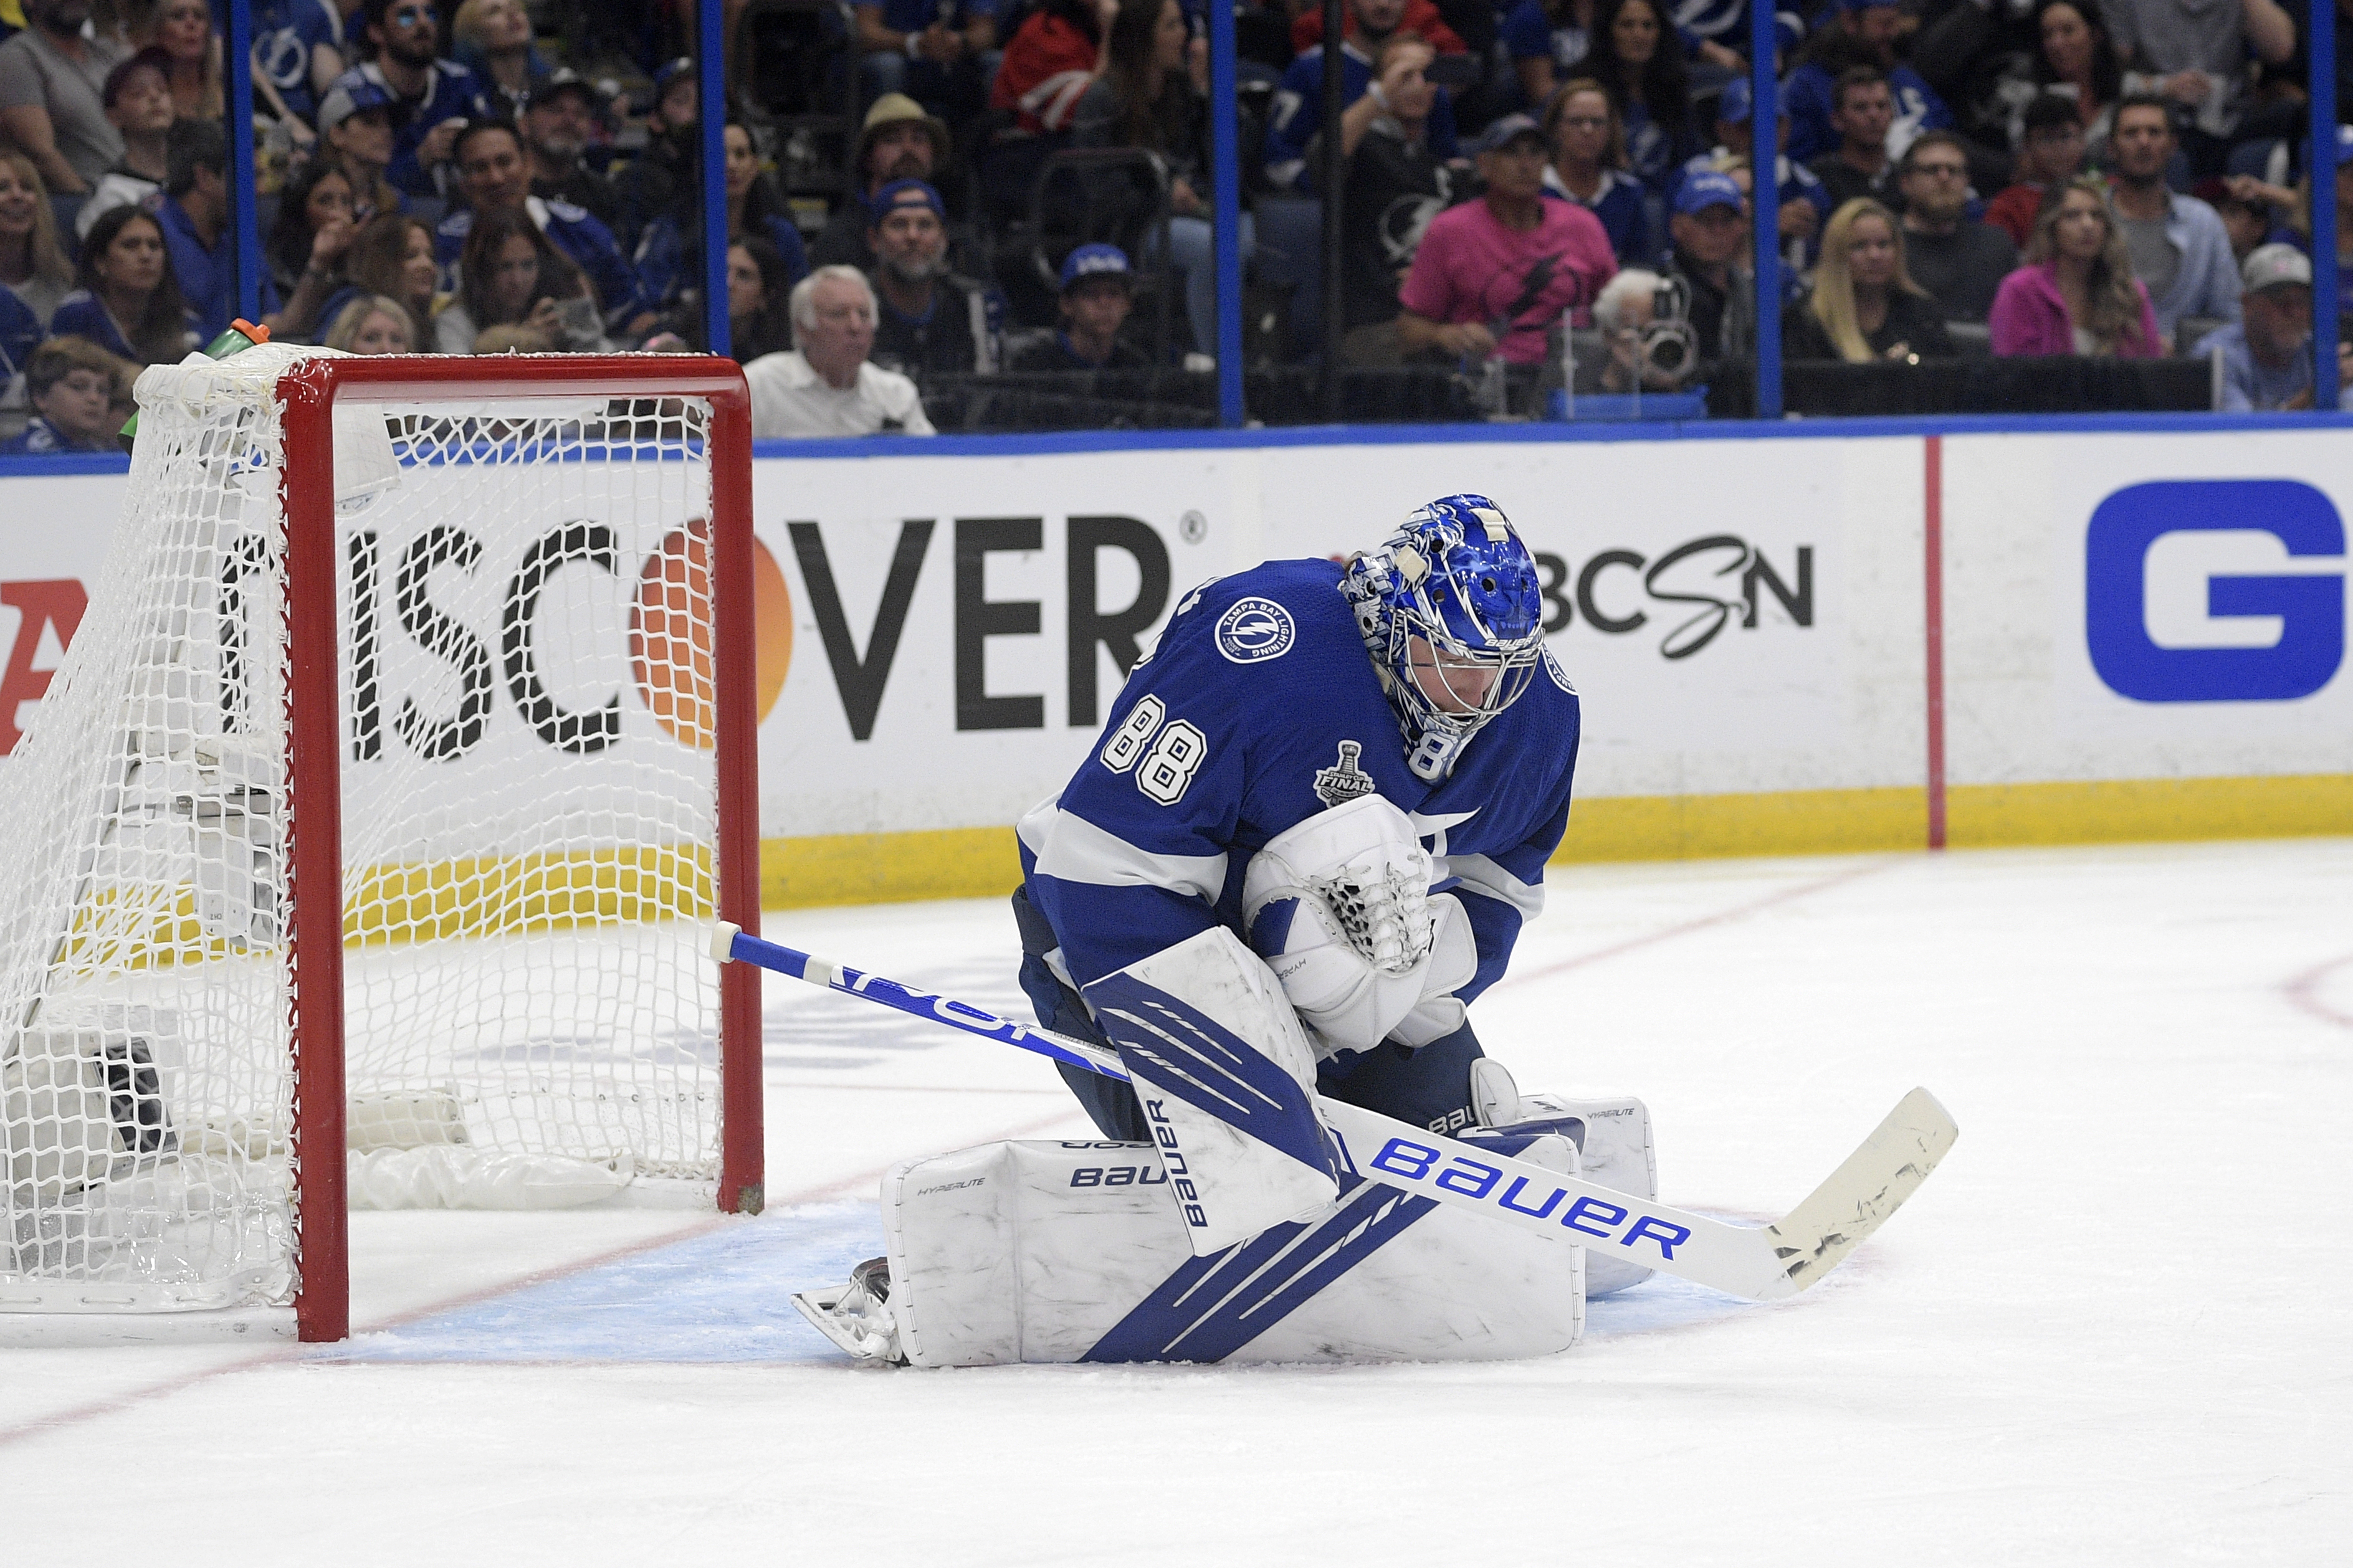 NHL playoffs How to LIVE STREAM FREE the Tampa Bay Lightning at Montreal Canadiens Friday (7-2-21)